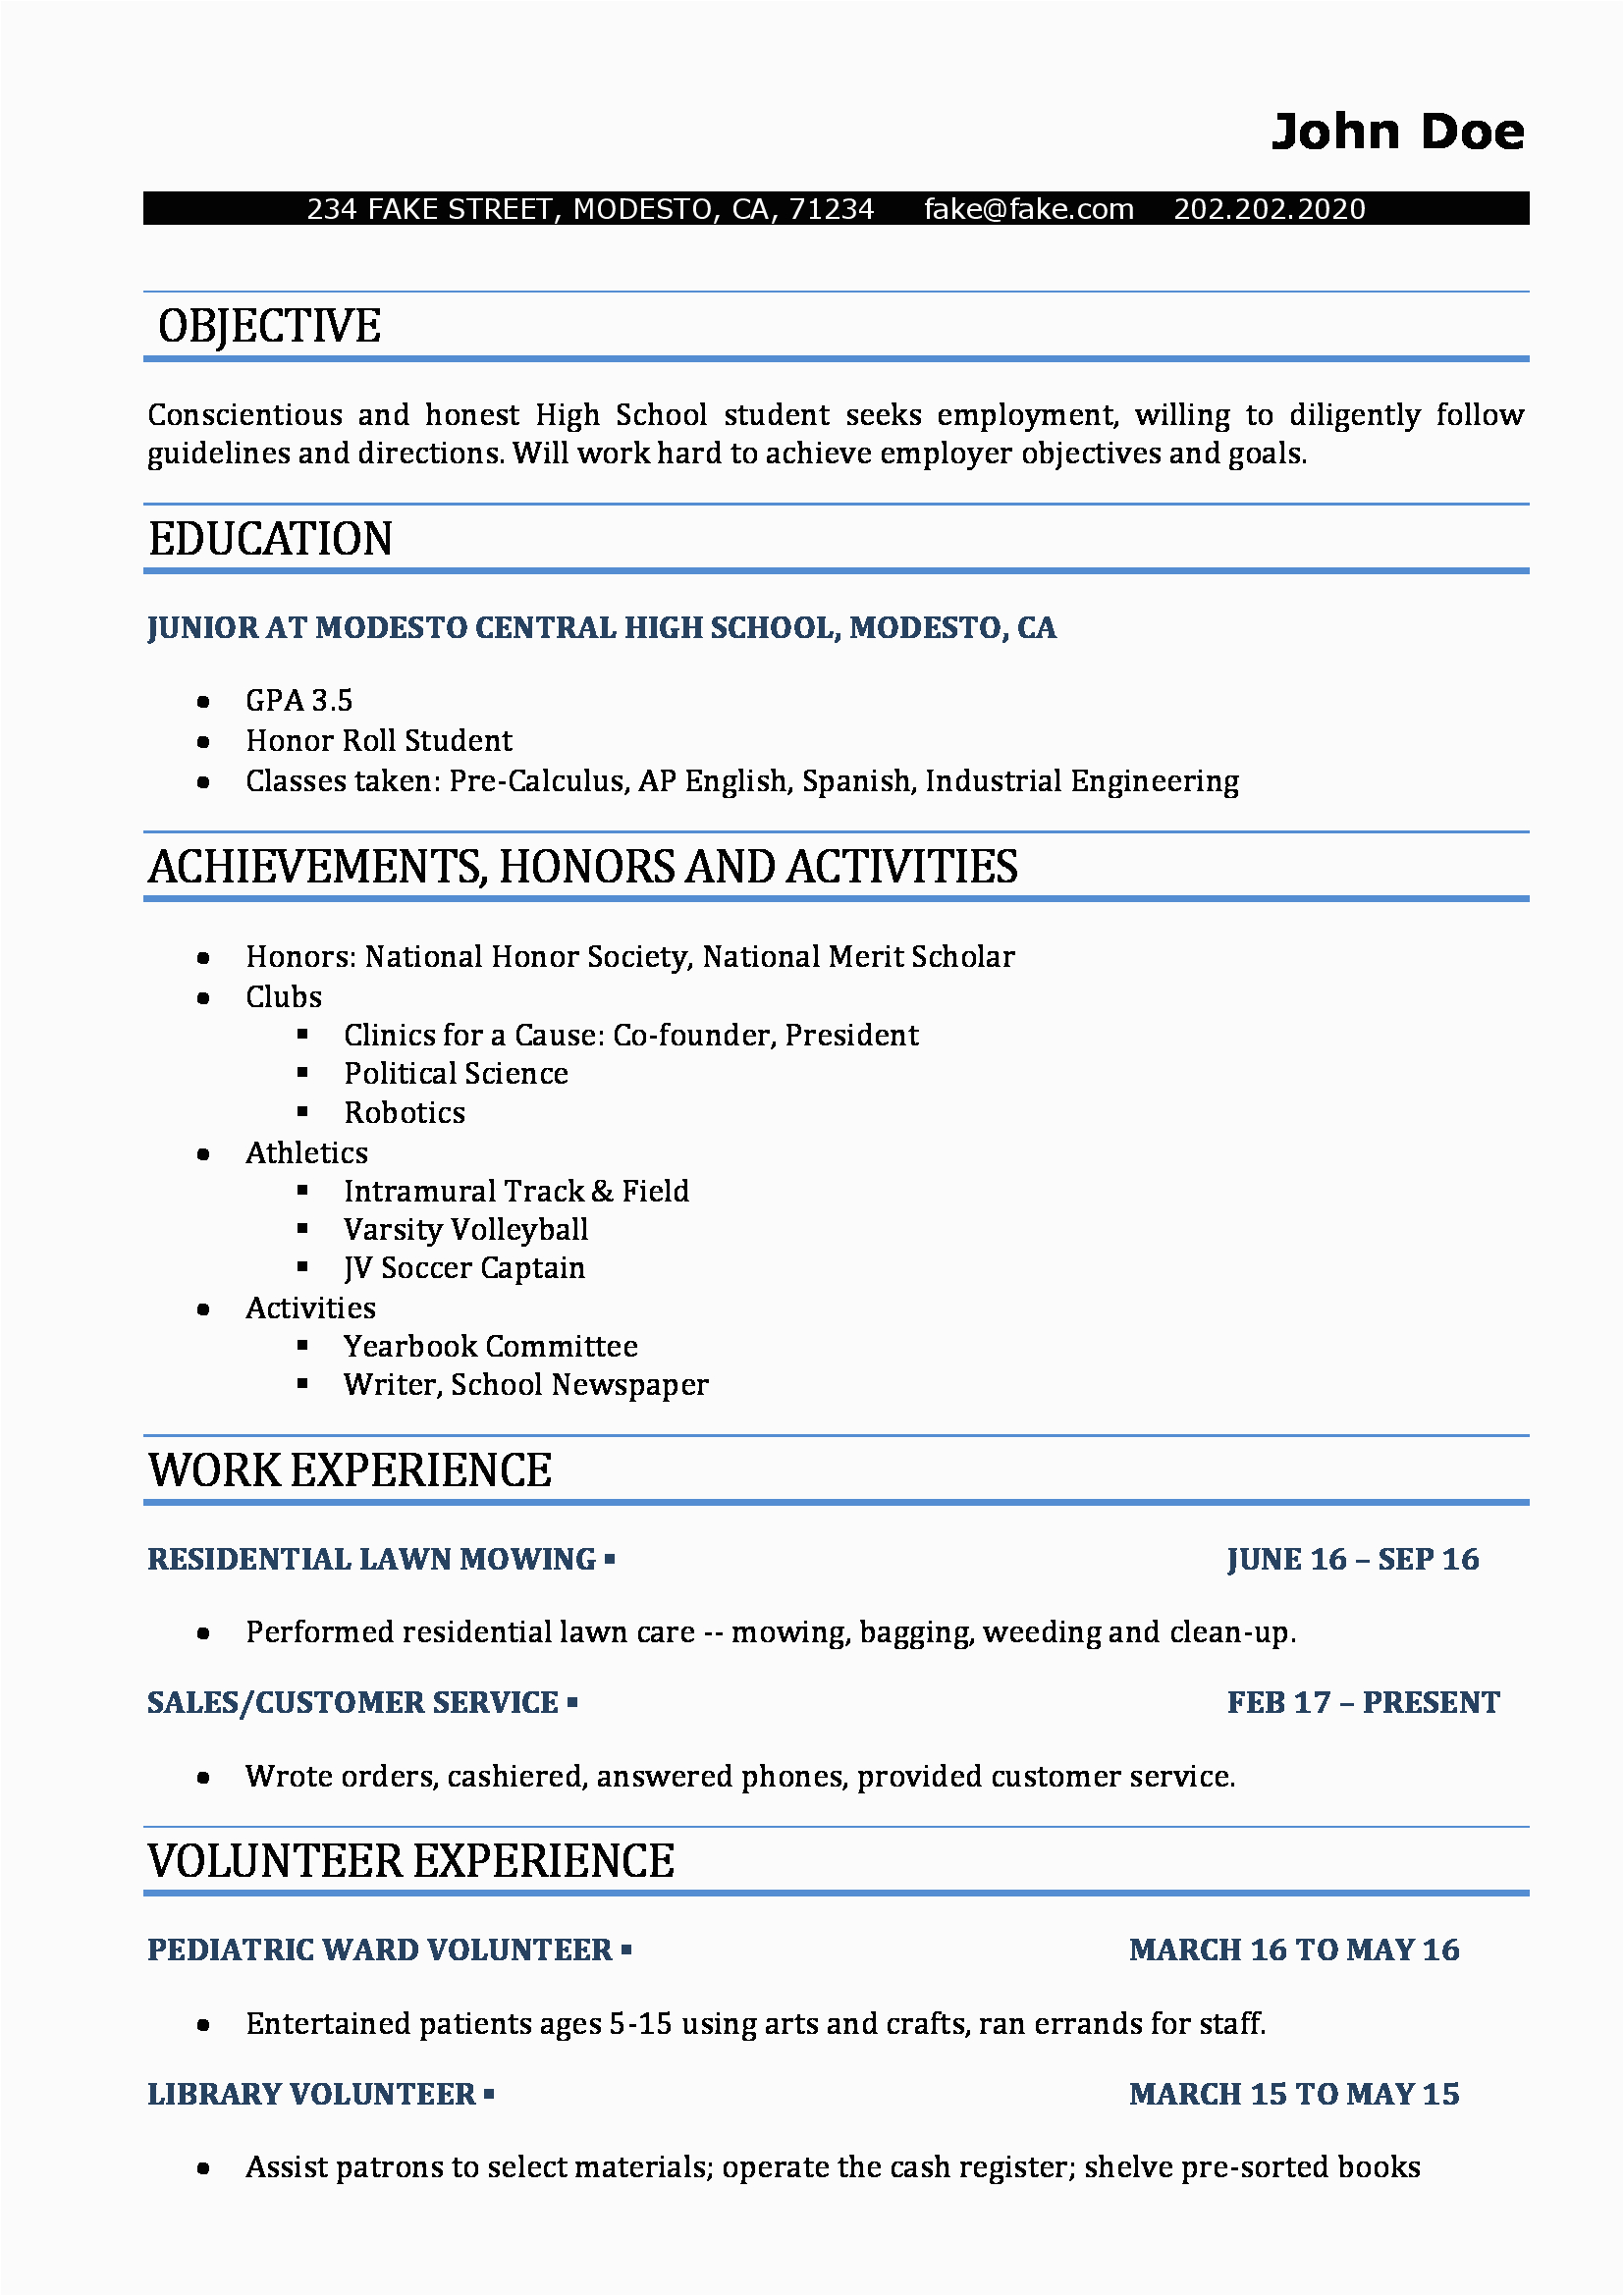 Sample Resume for A High School Senior High School Resume Resume Templates for High School Students and Teens